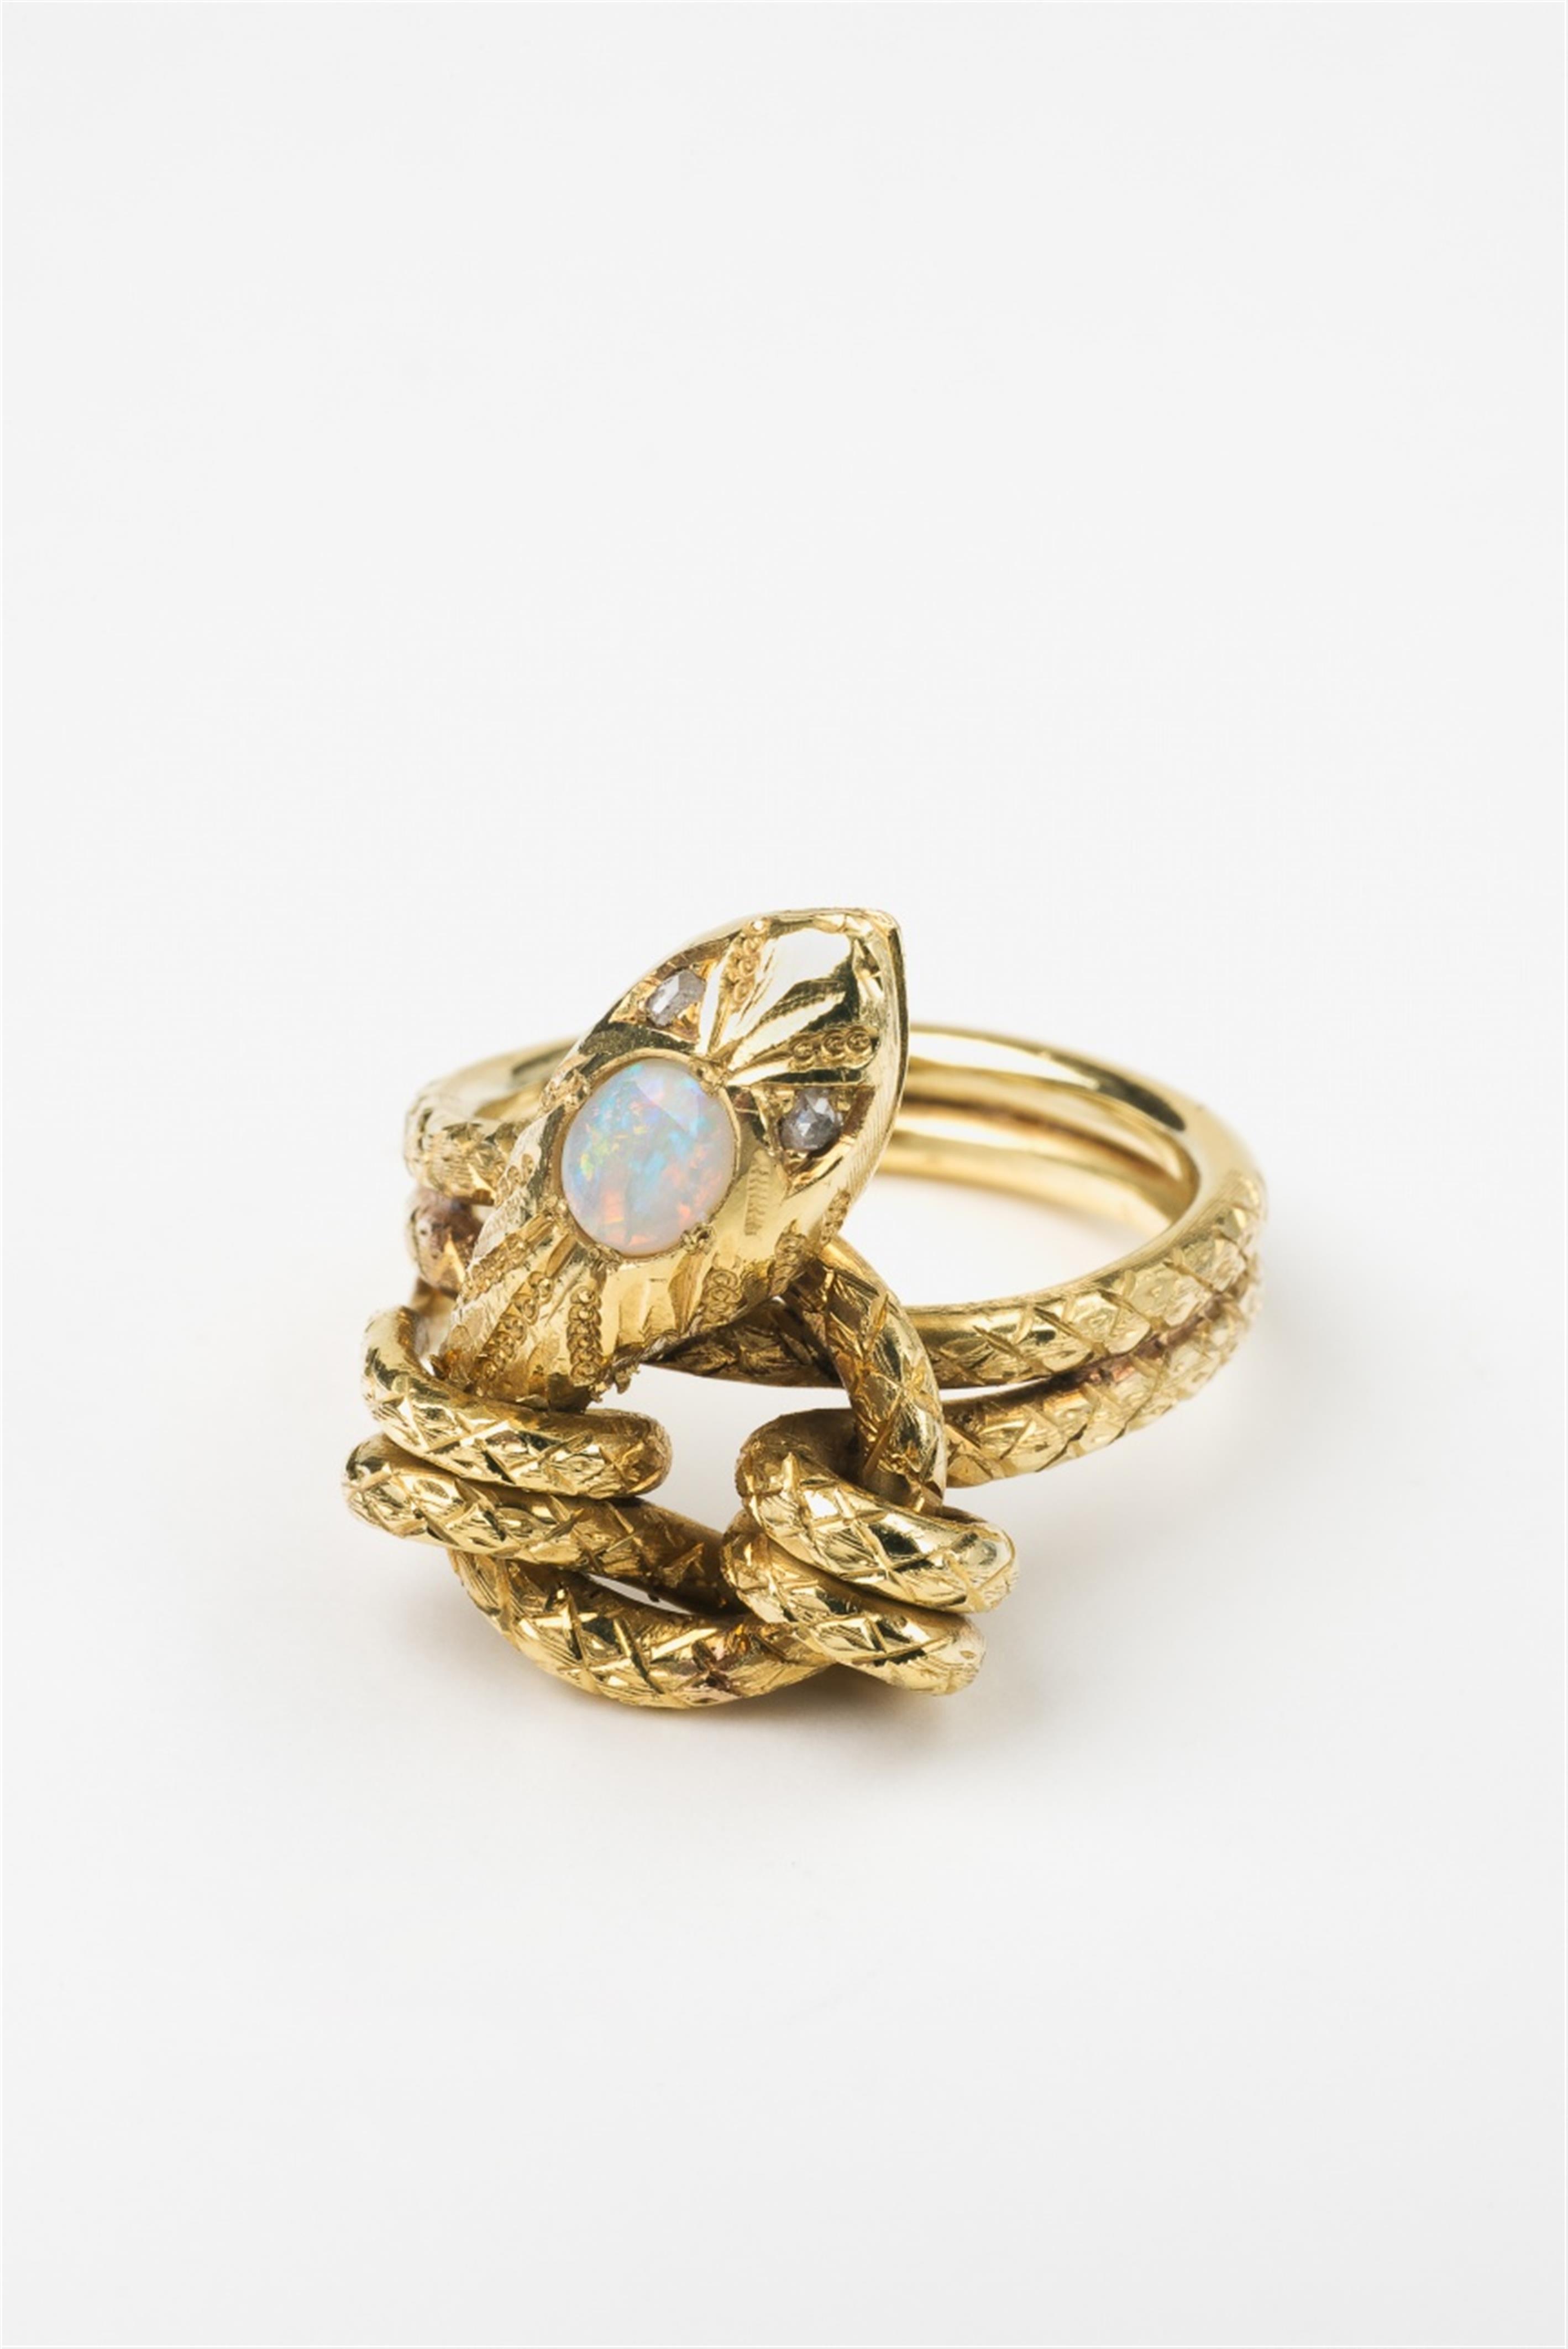 An 18k gold and opal snake ring - image-1